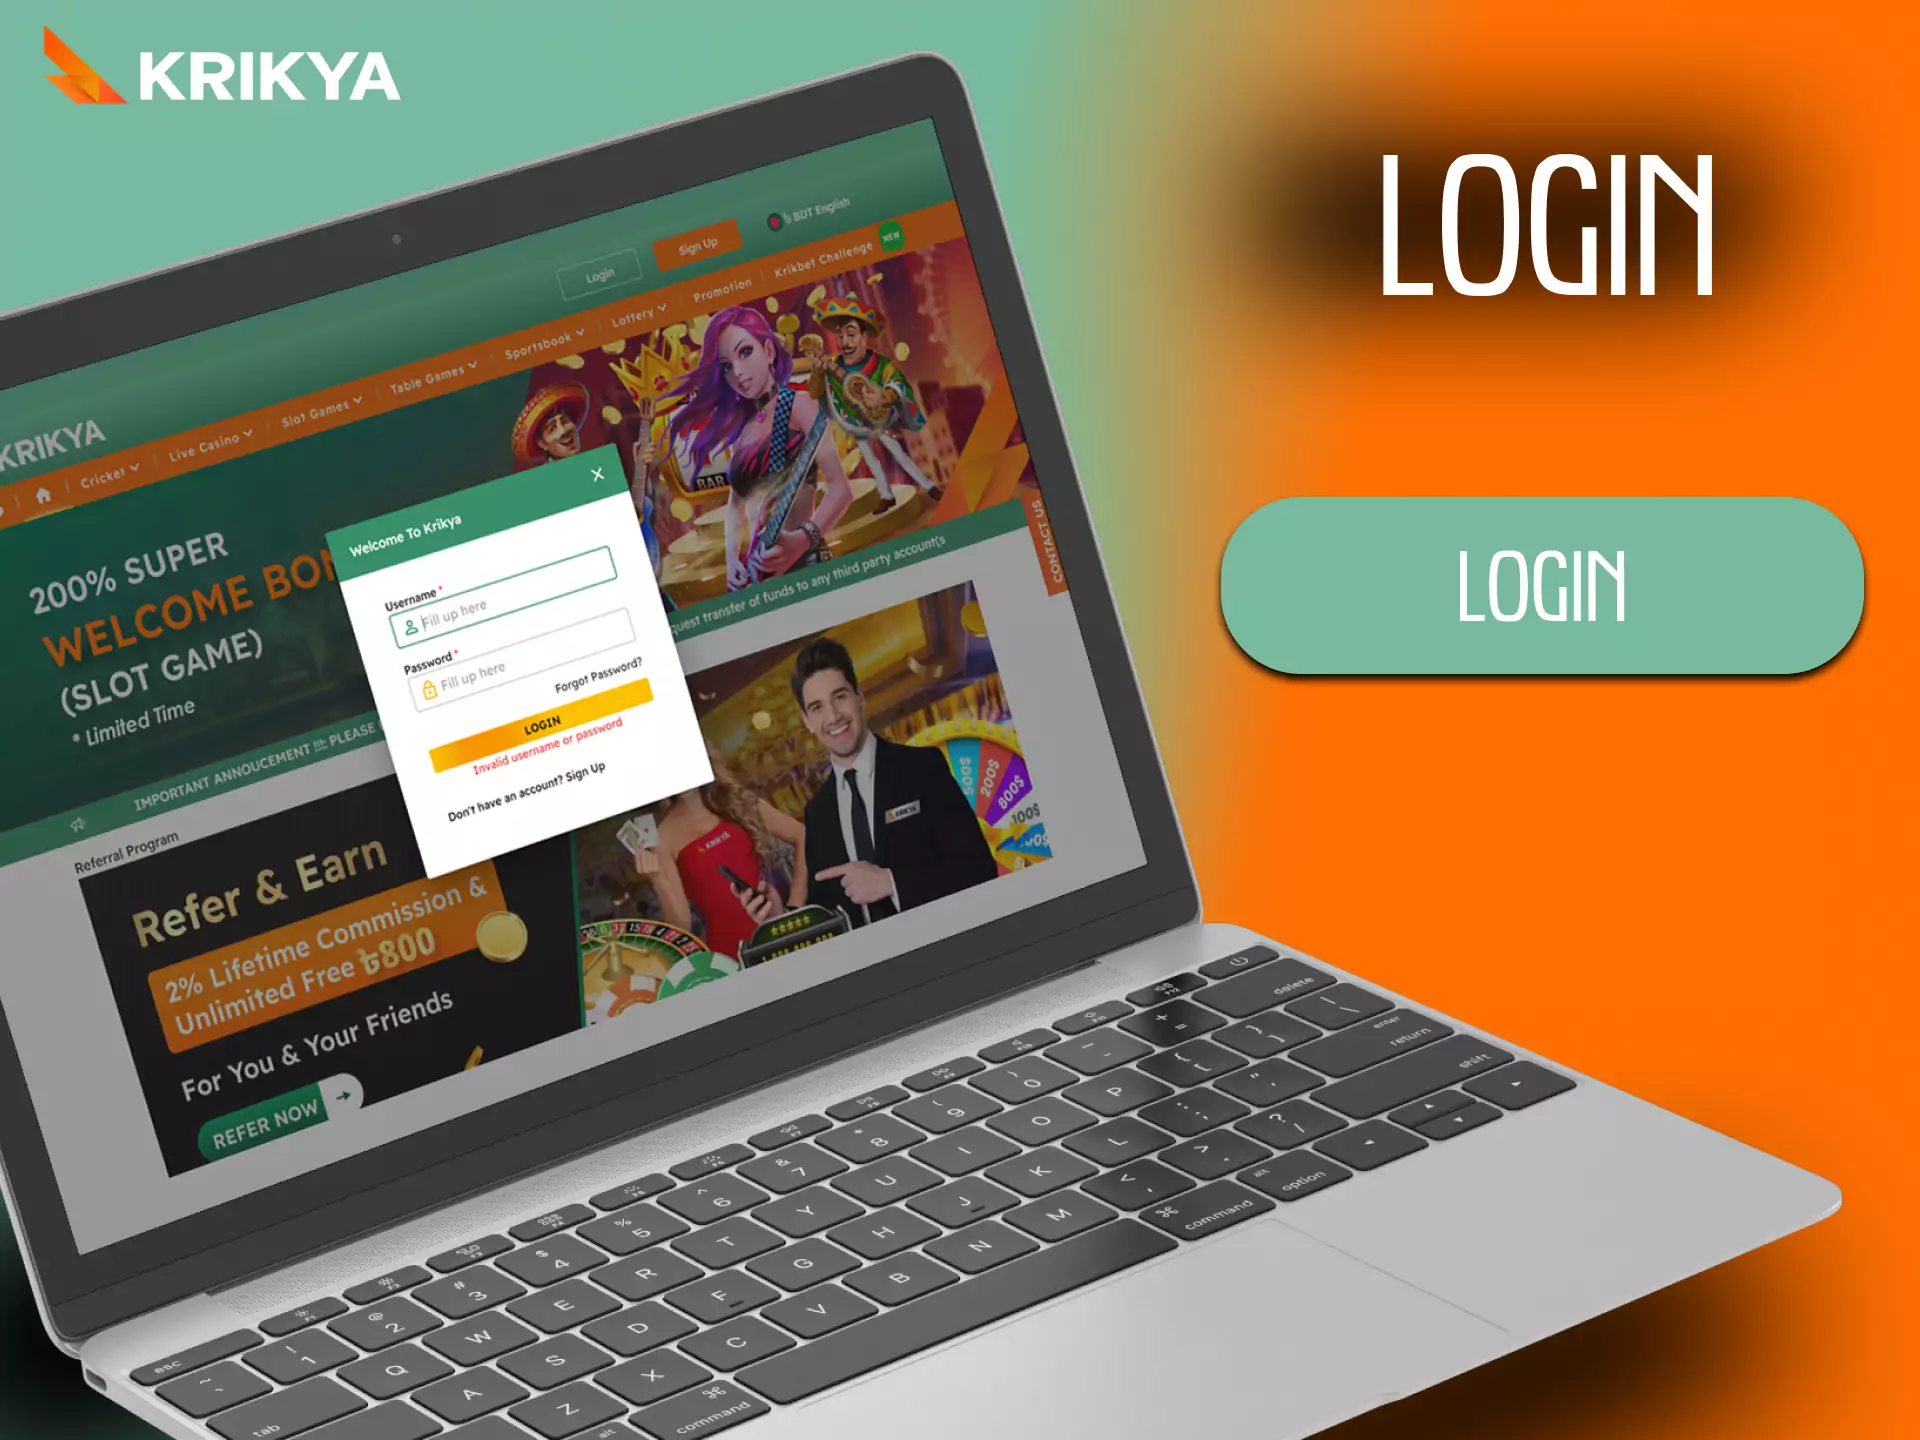 Log into your Krikya account to enjoy all the features and bonuses.